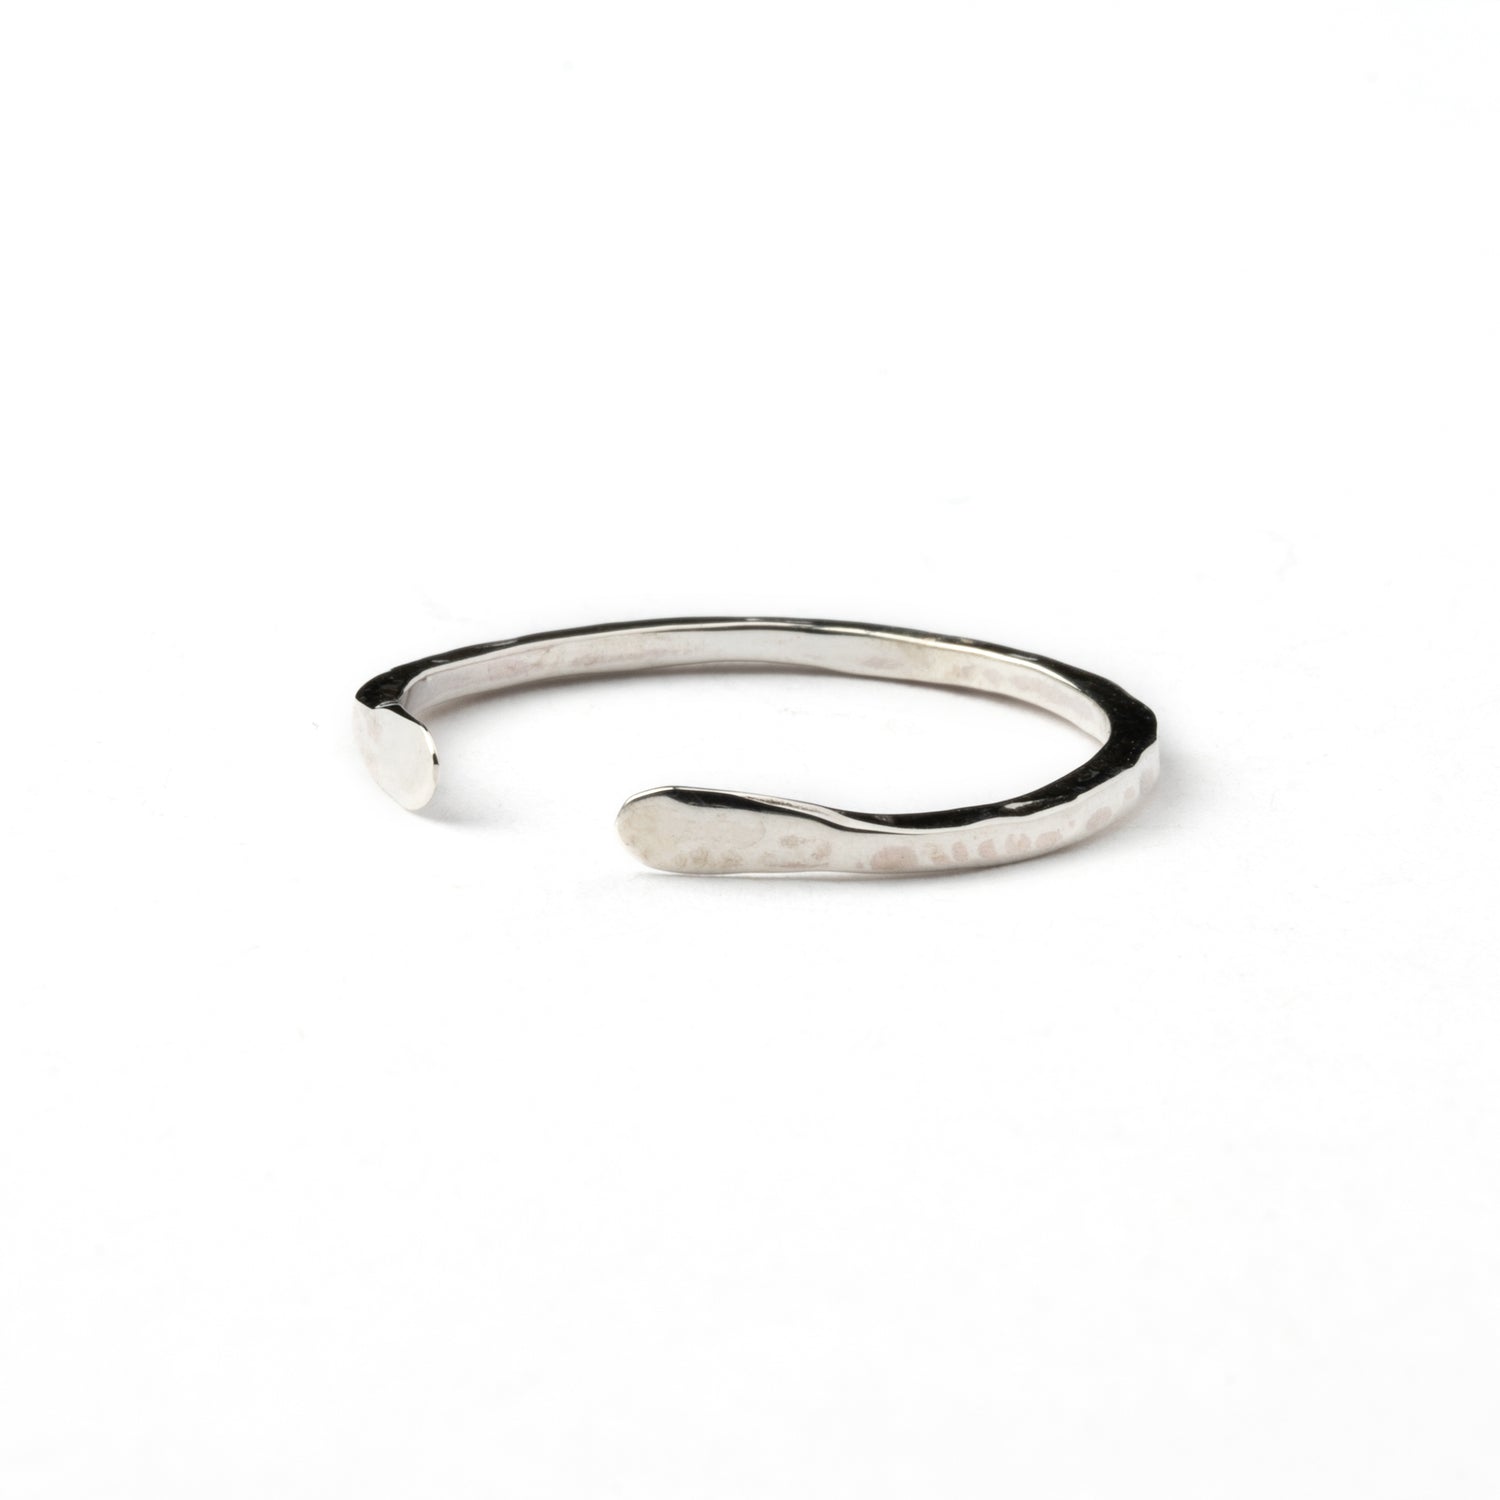 Hammered silver thin adjustable open band ring right side view